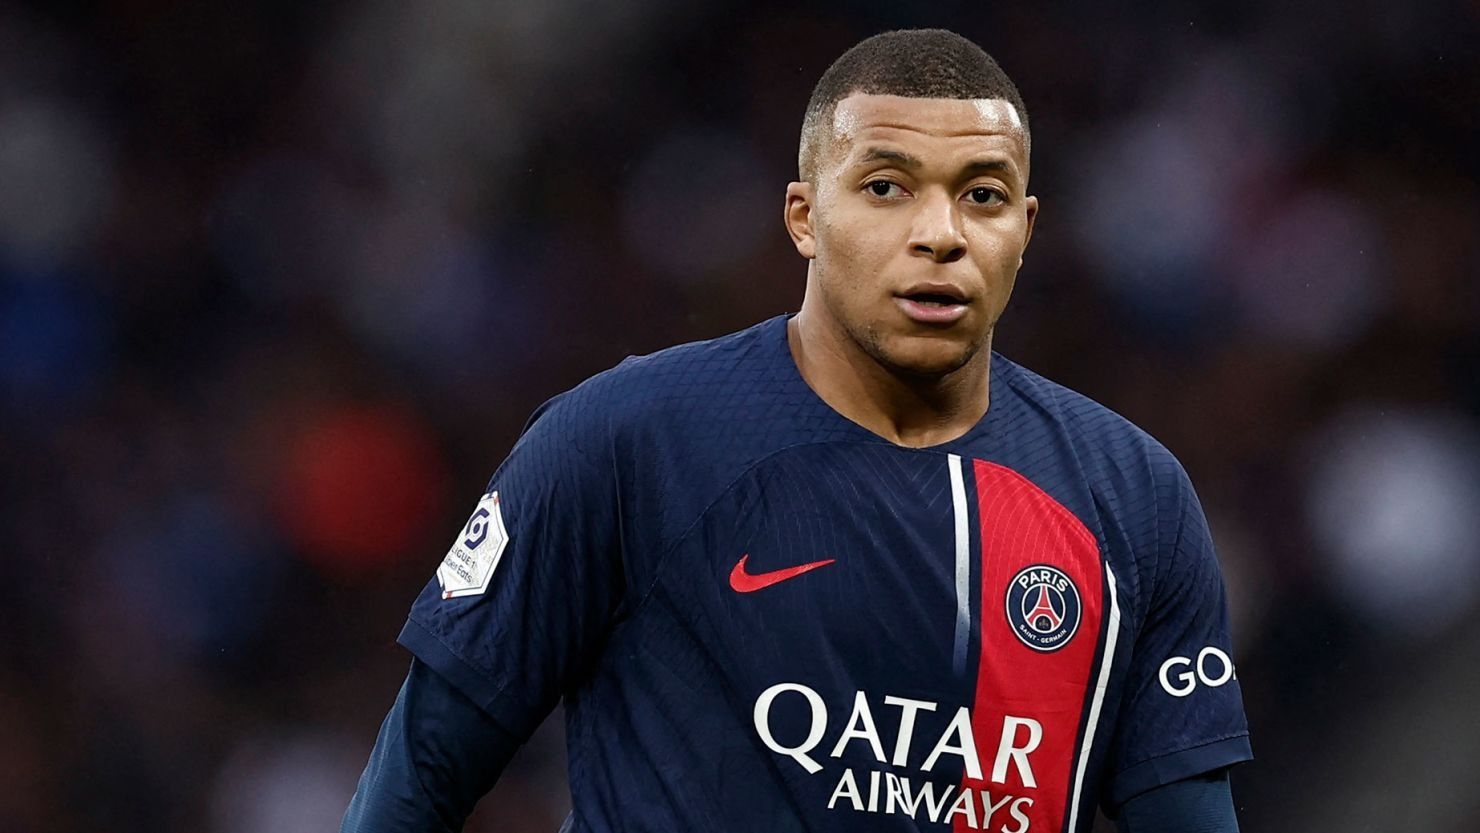 Mbappe Asks For €50m Salary And €120m Bonus From His Future Club